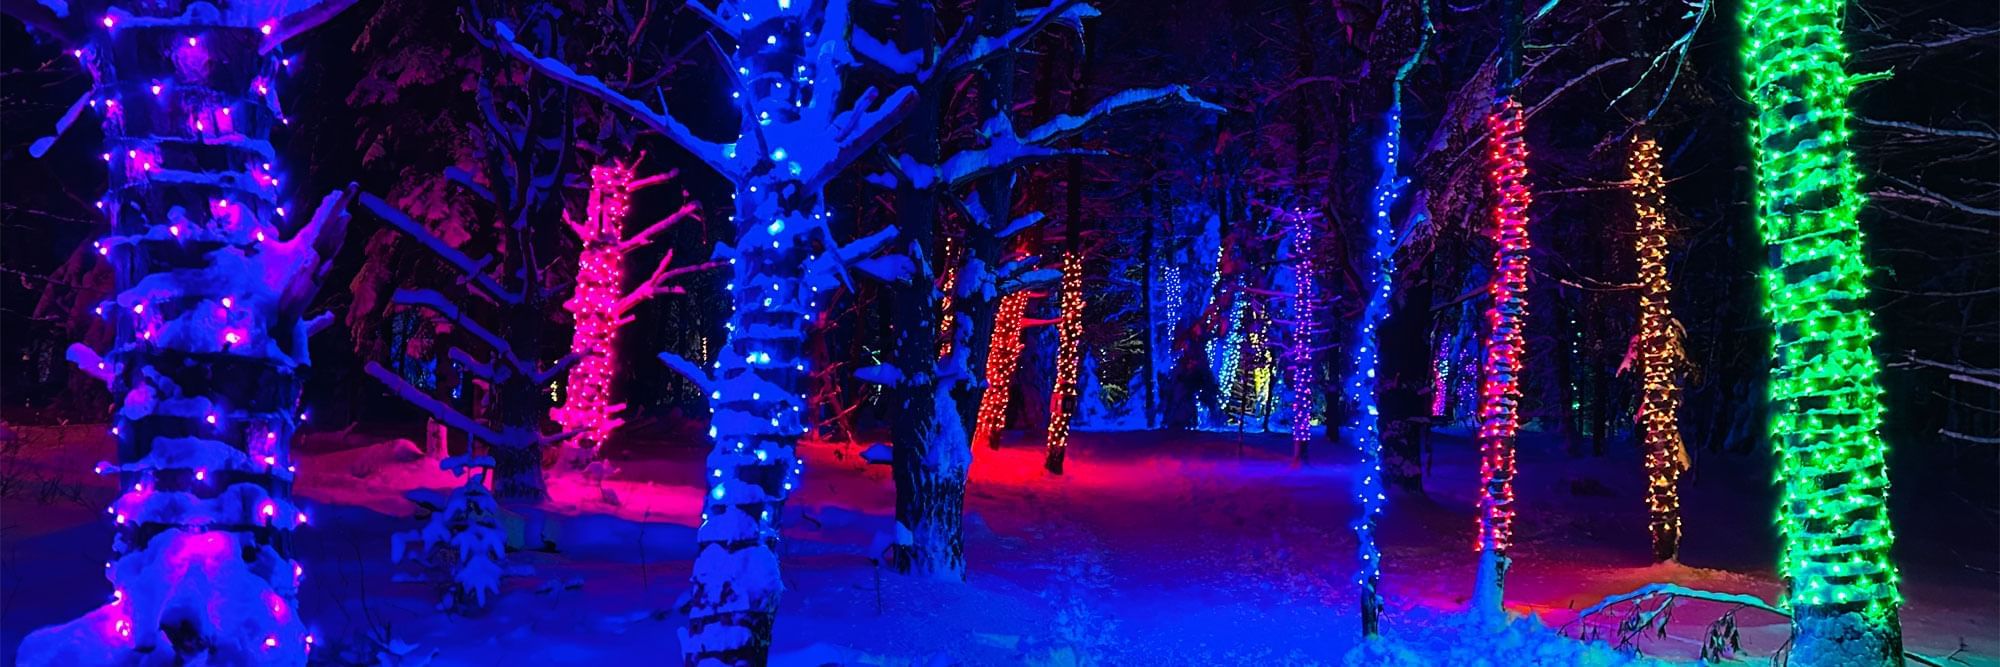 Forest snowshoe trail light up with lights wrapped around a tree. Photo Credit: Jami Santor